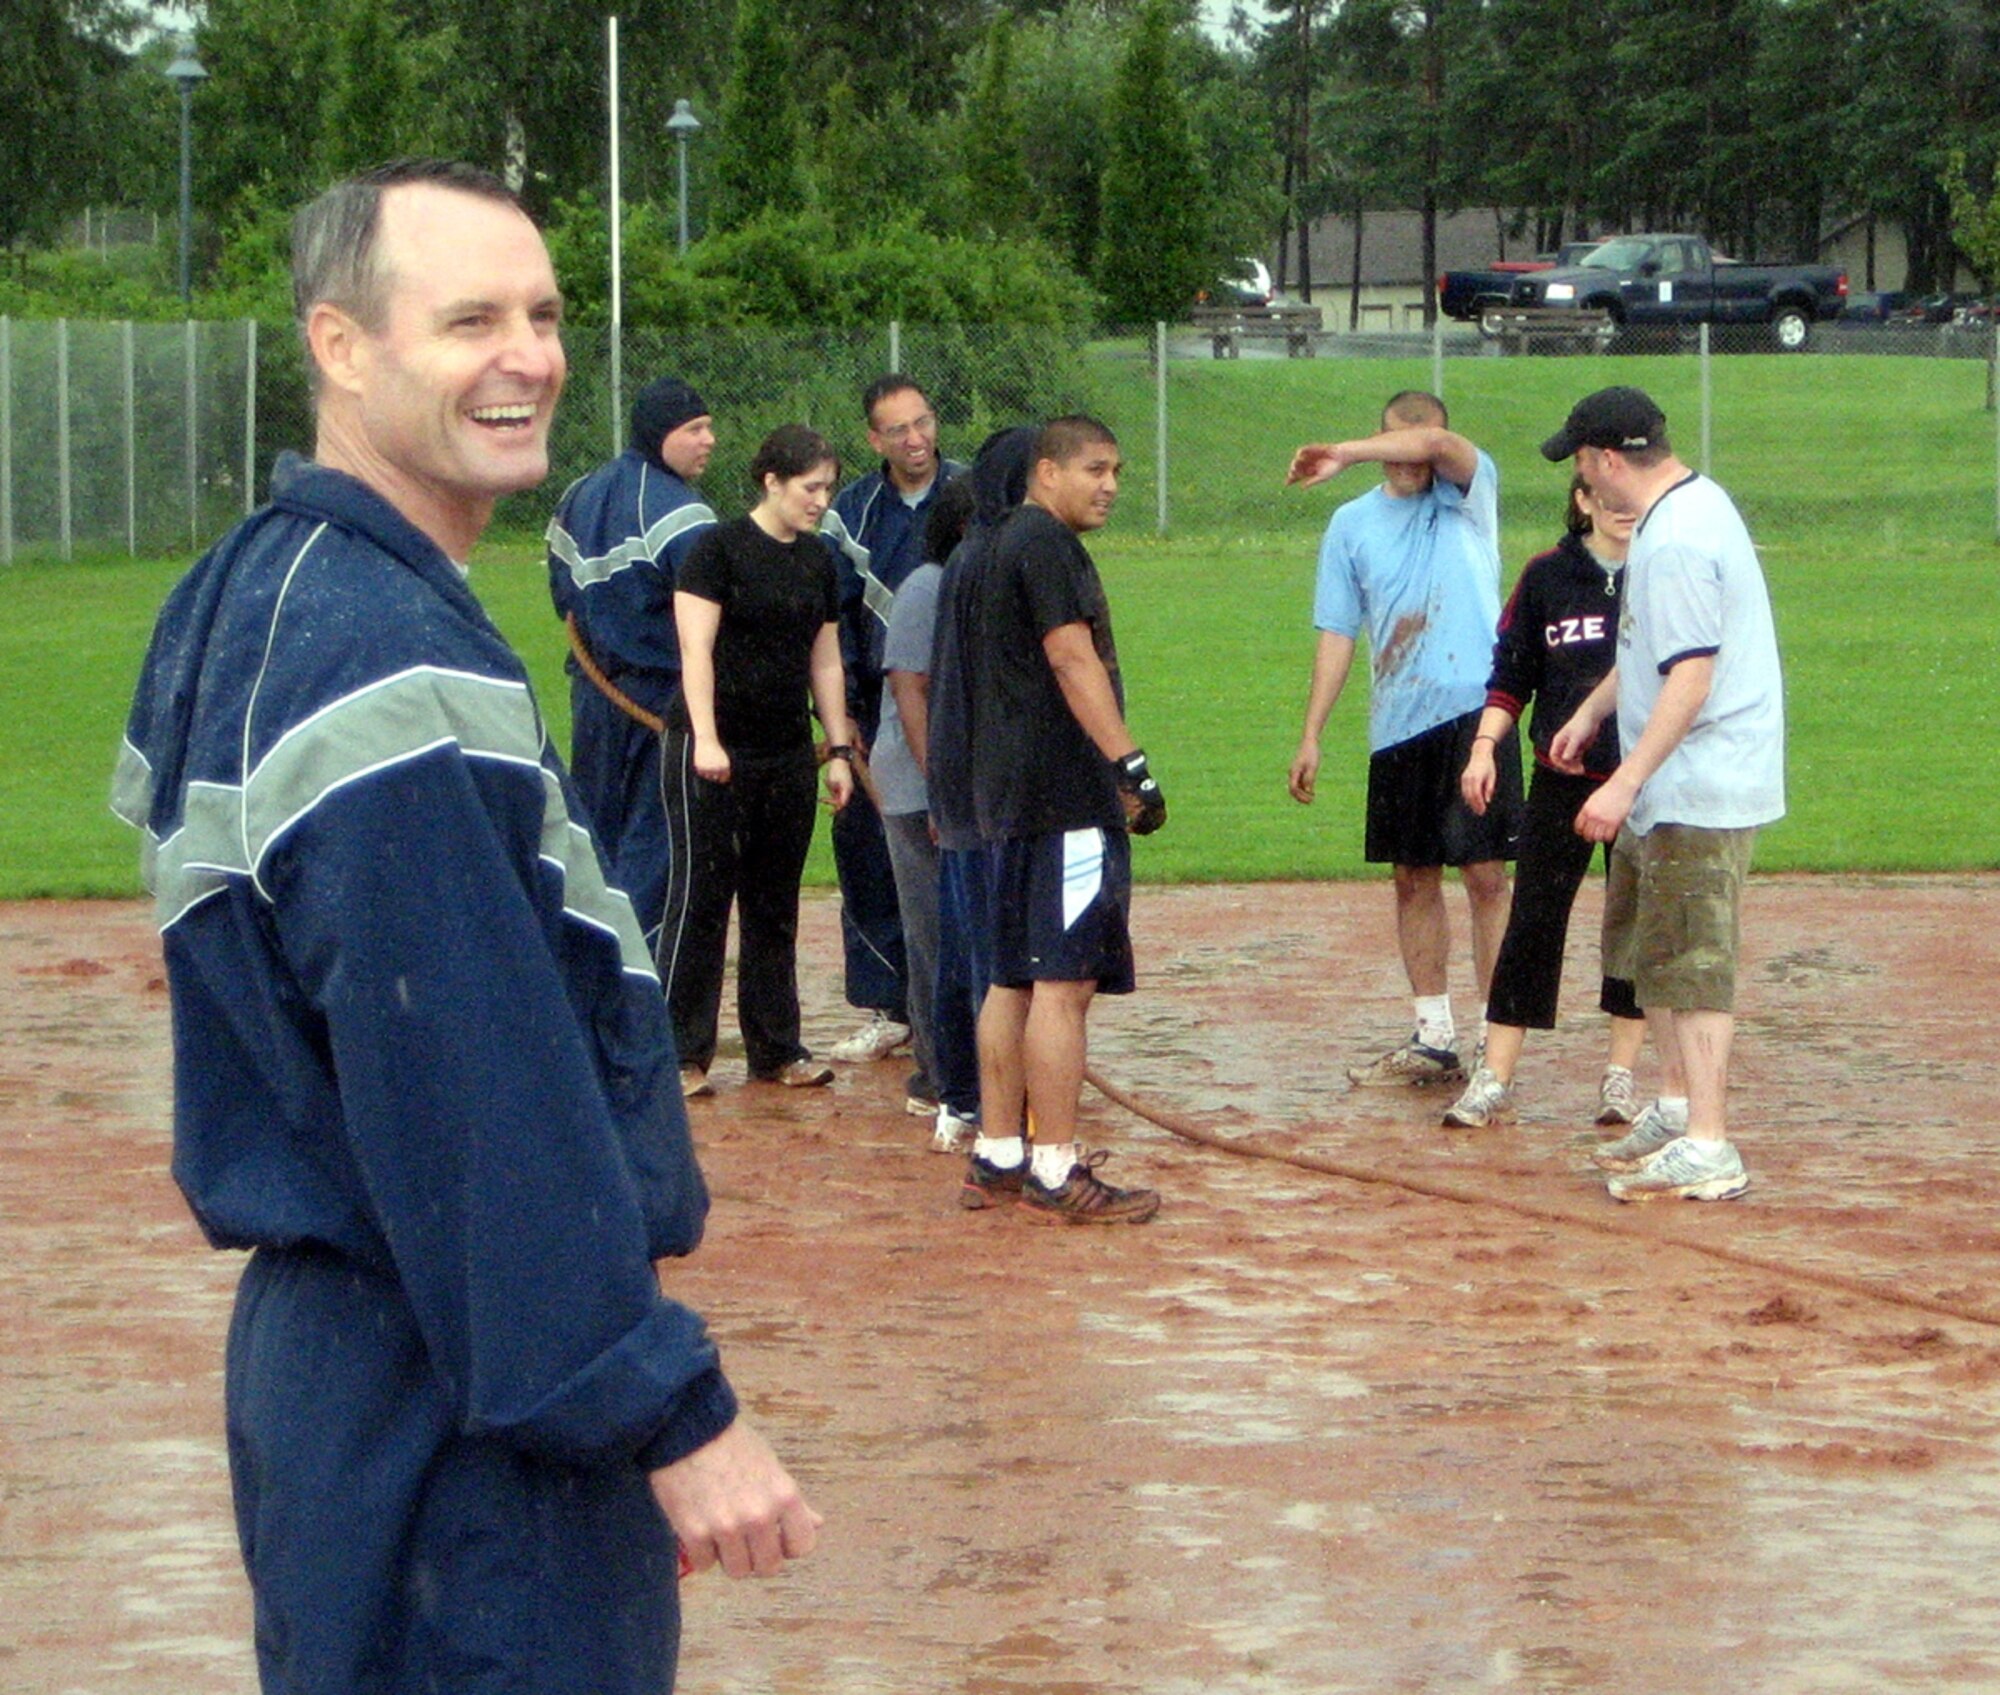 SPANGDAHLEM AIR BASE GERMANY -- Col. Darryl Roberson, 52nd Fighter Wing commander, enjoys the rain along with several Airmen participating in tug-of-war during the 52nd FW's Sport Day July 2, 2007. (U.S. Air Force photo)